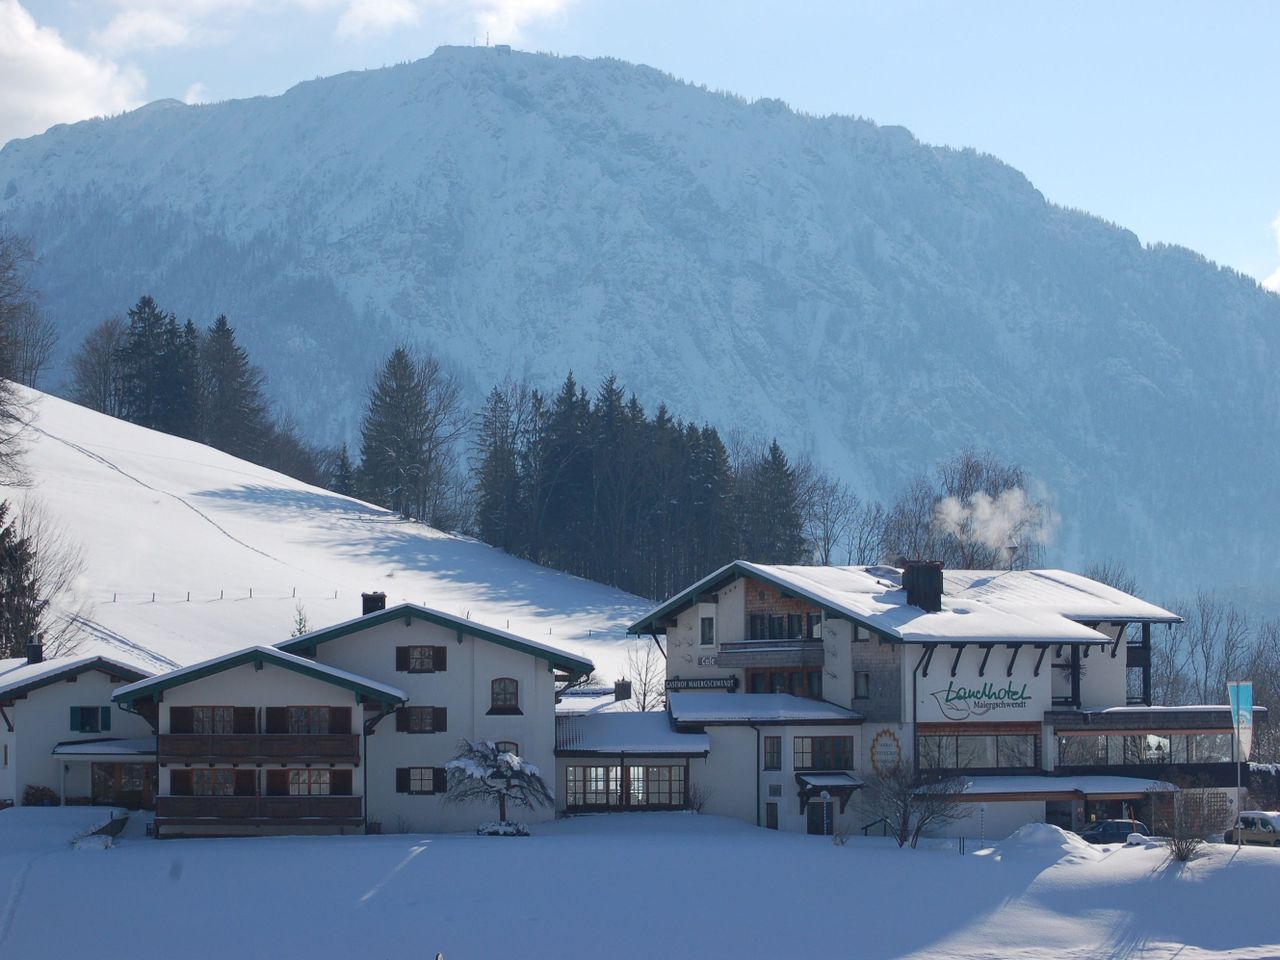 Erholung pur! 4 Tage Ruhpolding mit Therme & Massage